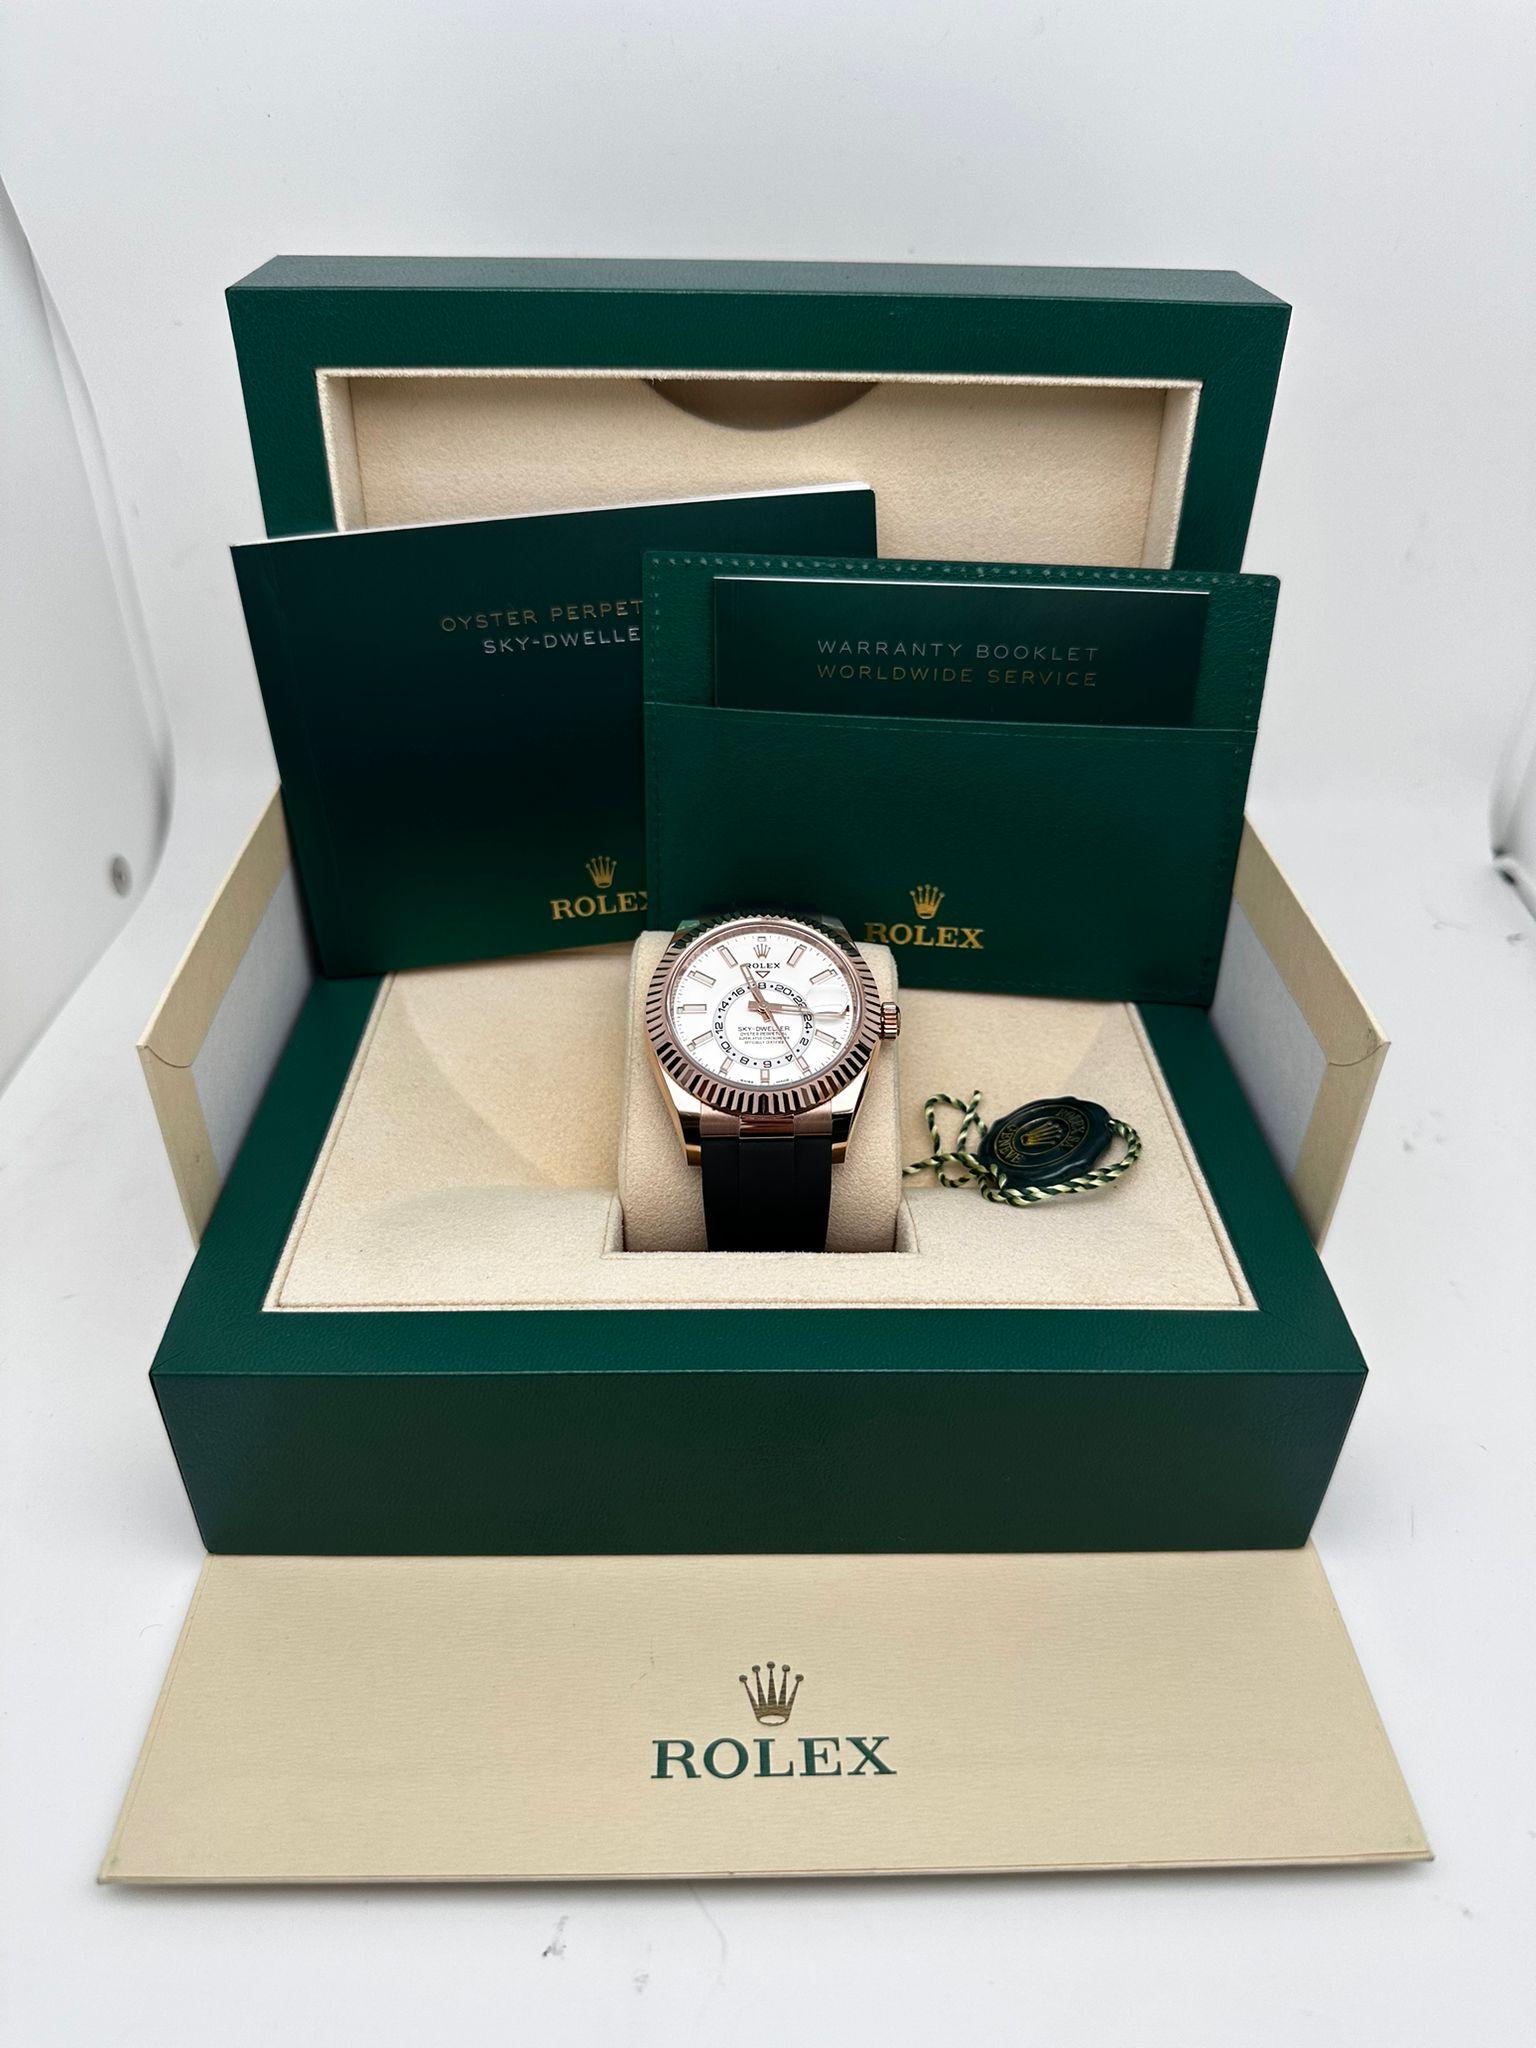 Unworn. Original Box and Papers are Included.

* Free Shipping within the USA
* Five-year warranty coverage
* 14-day return policy with a full refund. Buyers can verify the watch's authenticity at any boutique or dealership within this period
*